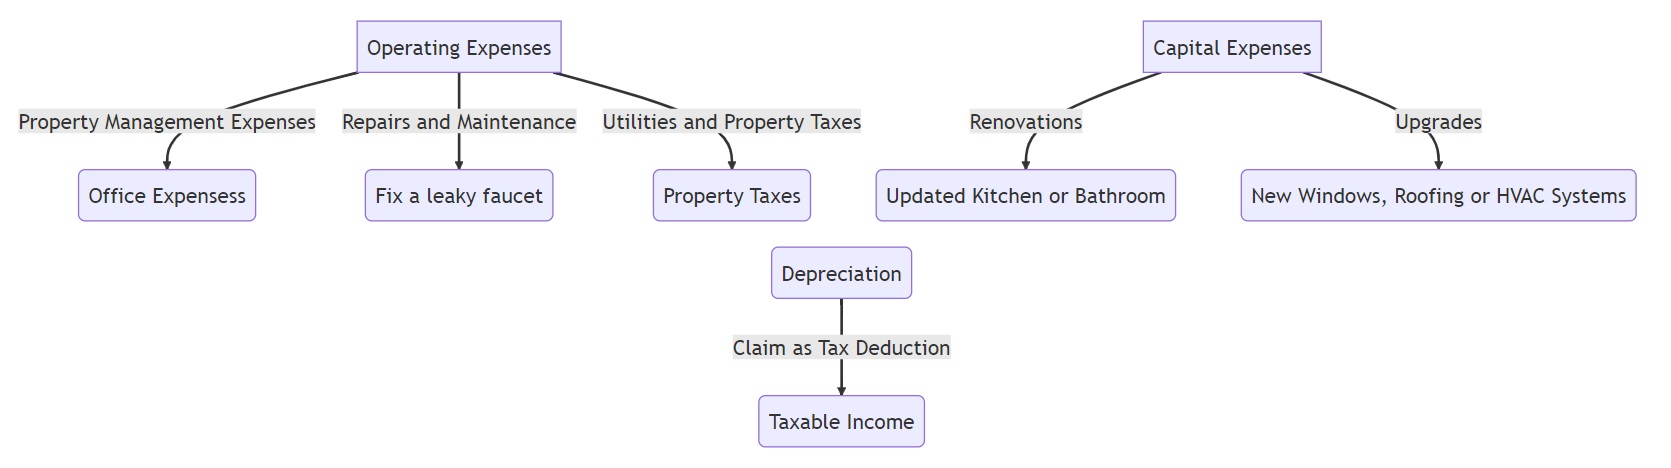 Rental Property Expenses and their classification